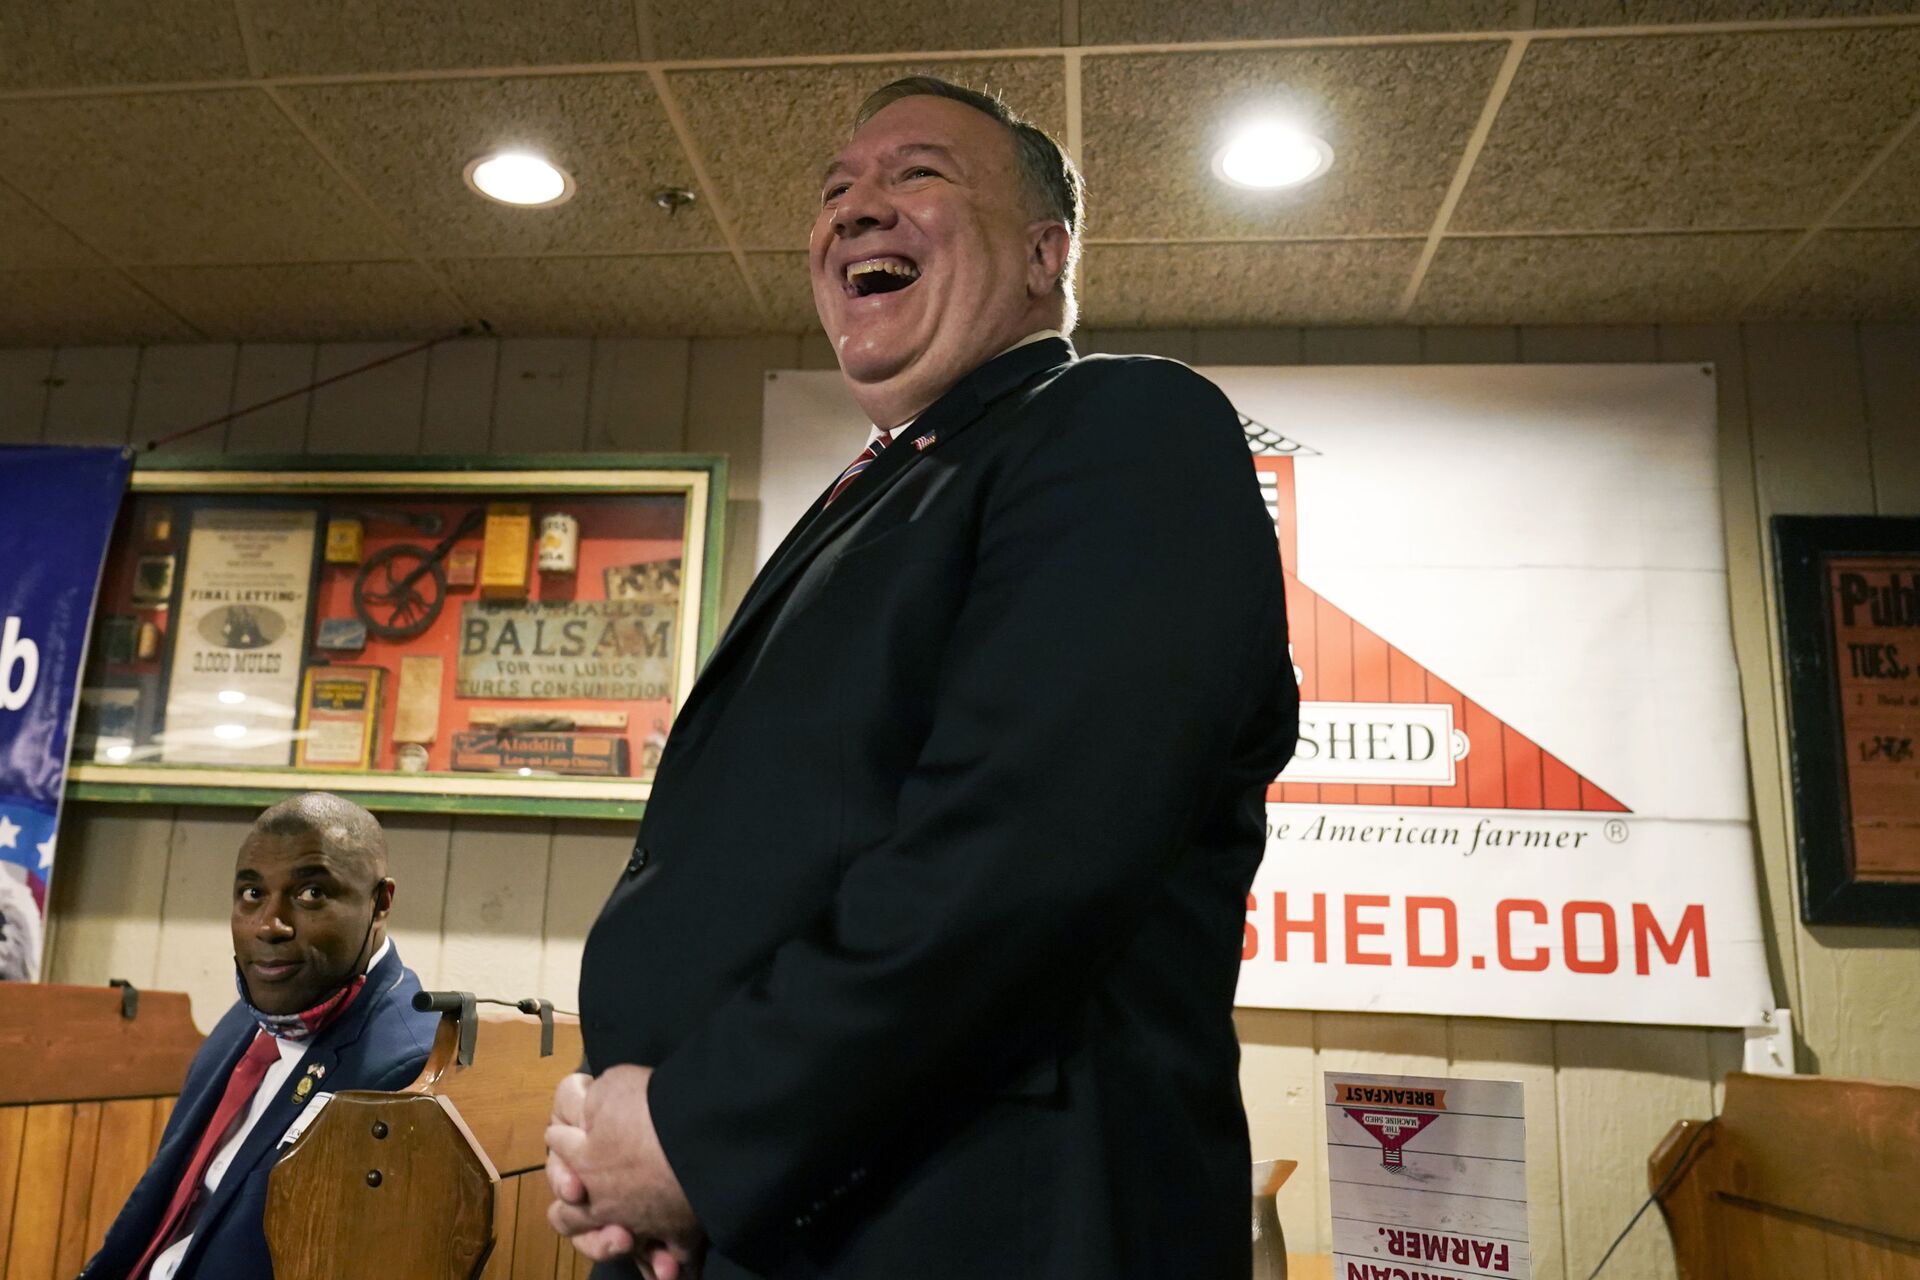 Pompeo's Upcoming Trip to Iowa Fuels More Speculation About Potential 2024 Presidential Run - Sputnik International, 1920, 30.05.2021